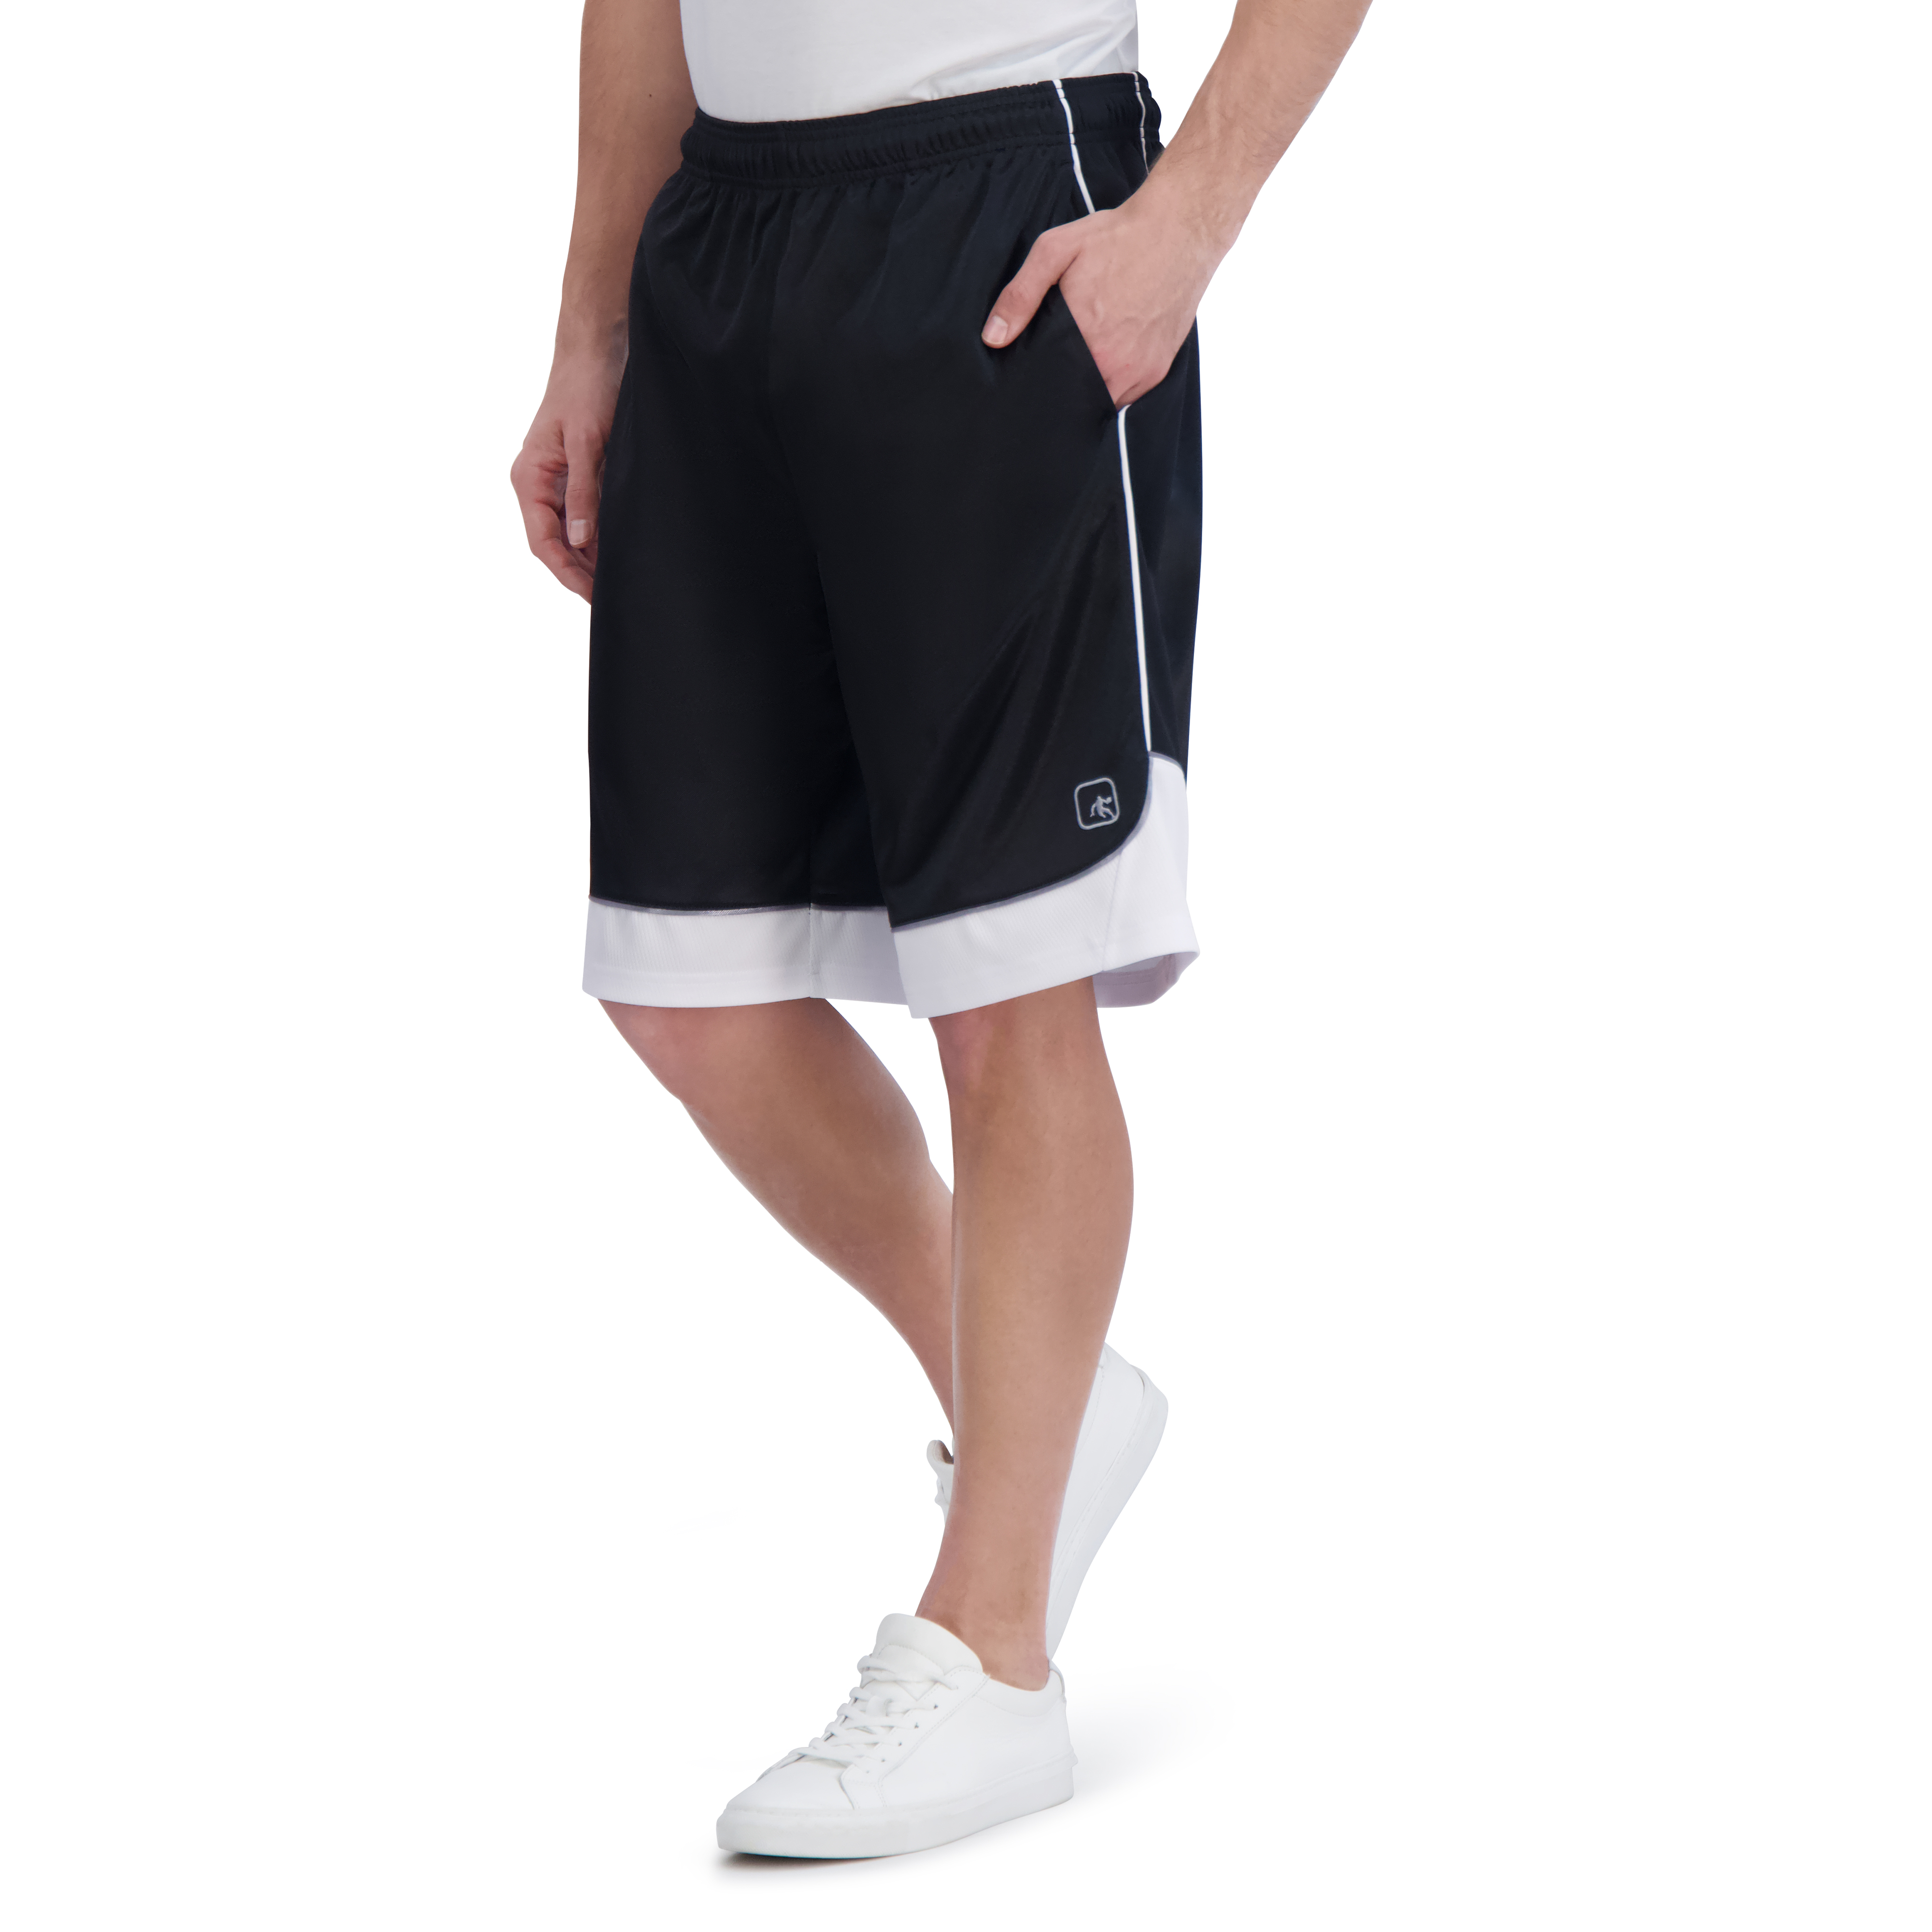 AND1 Men and Big Men's All Court Colorblock 11" Shorts, up to Size 3XL - image 5 of 6